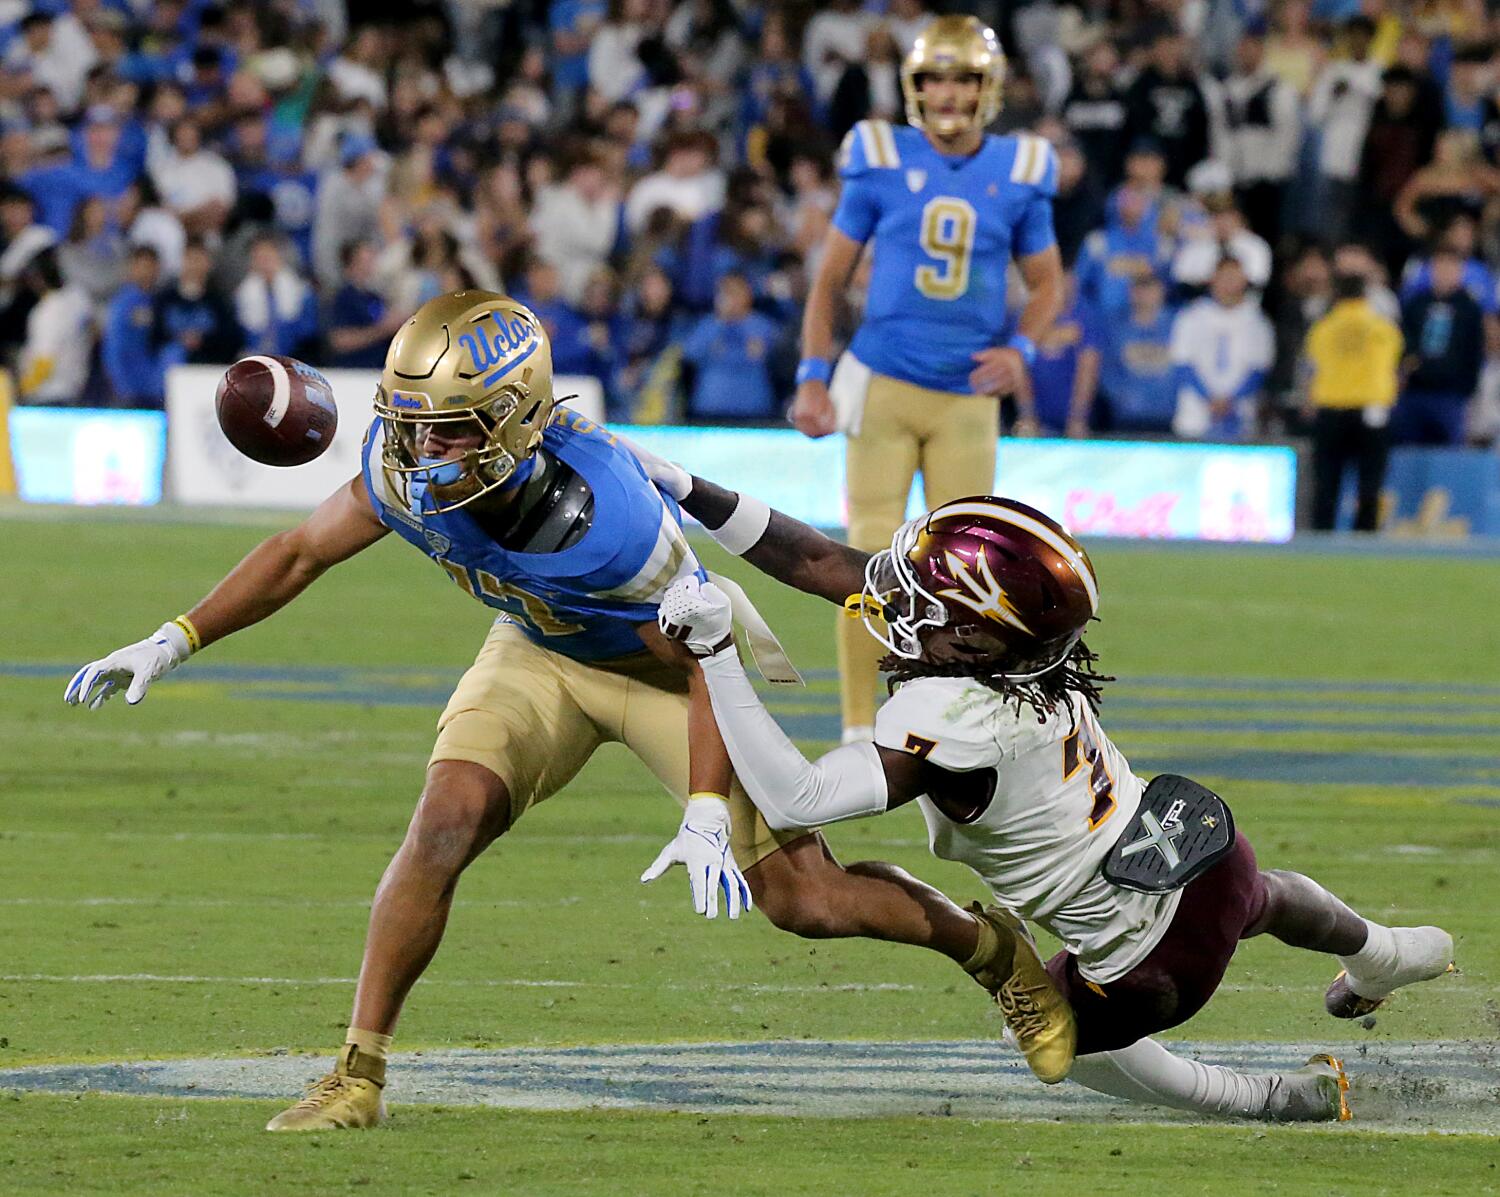 Commentary: For USC and UCLA football fans, misery will find easy company at Coliseum